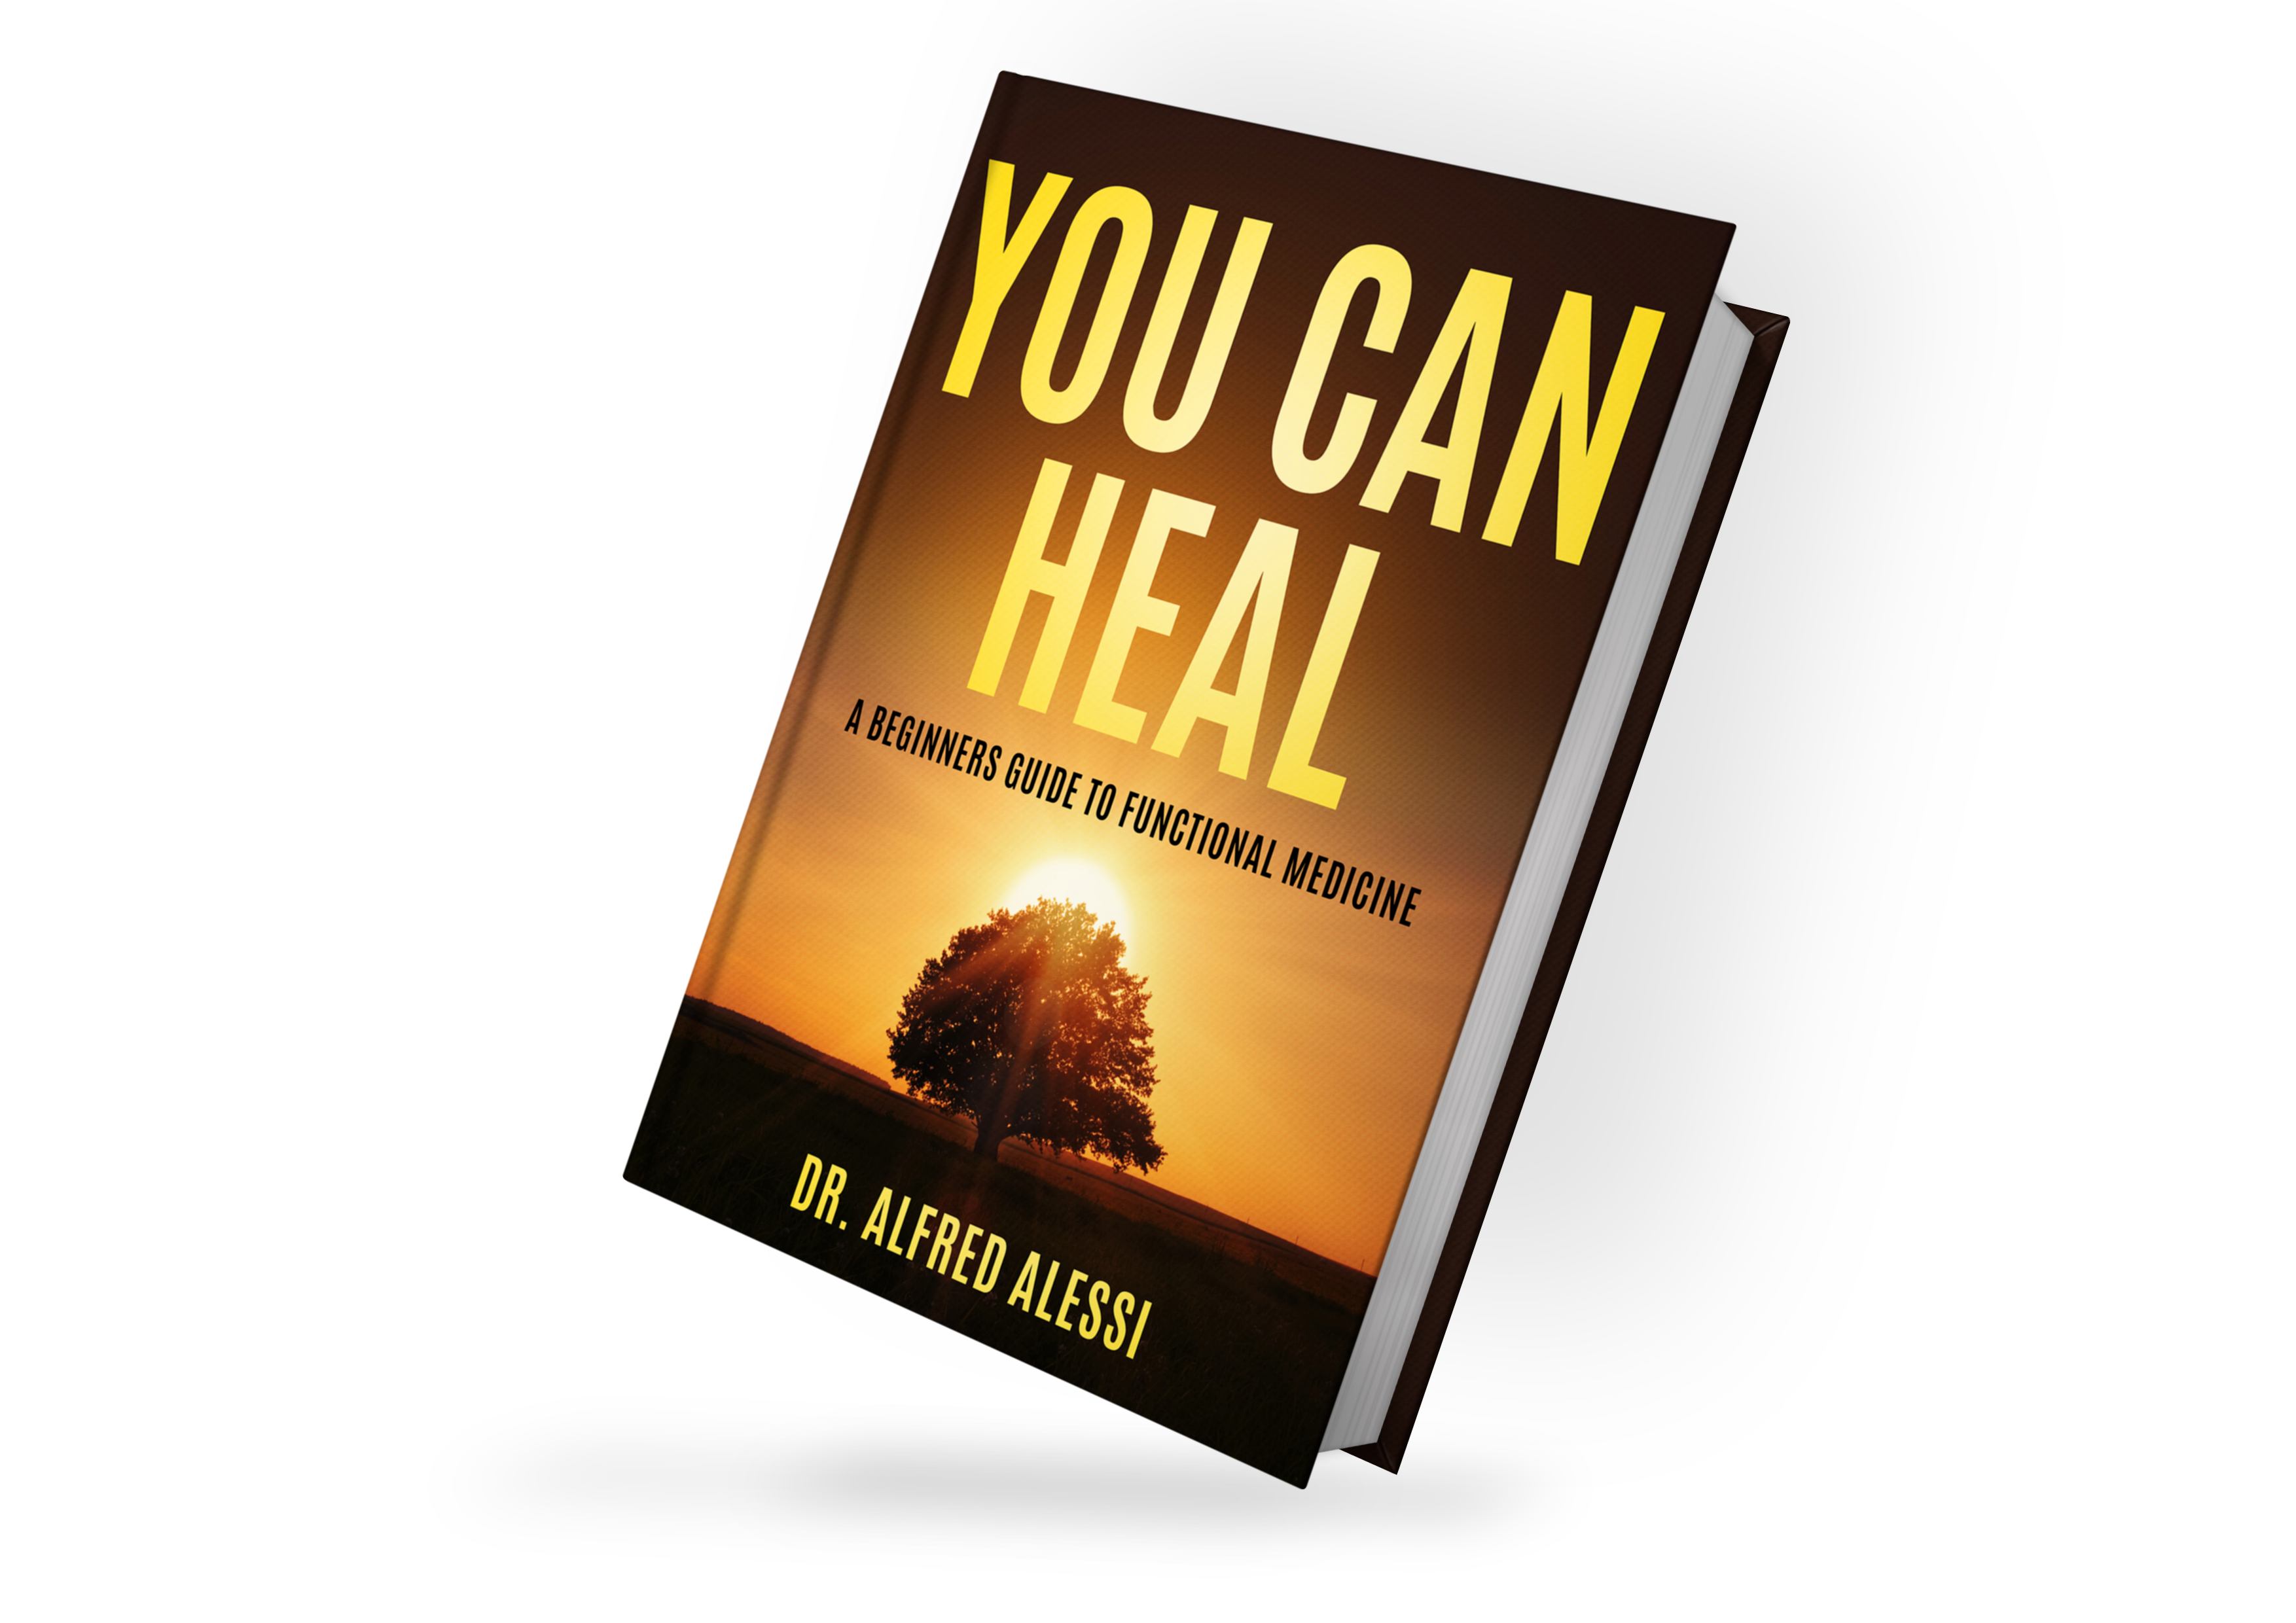 You Can Heal